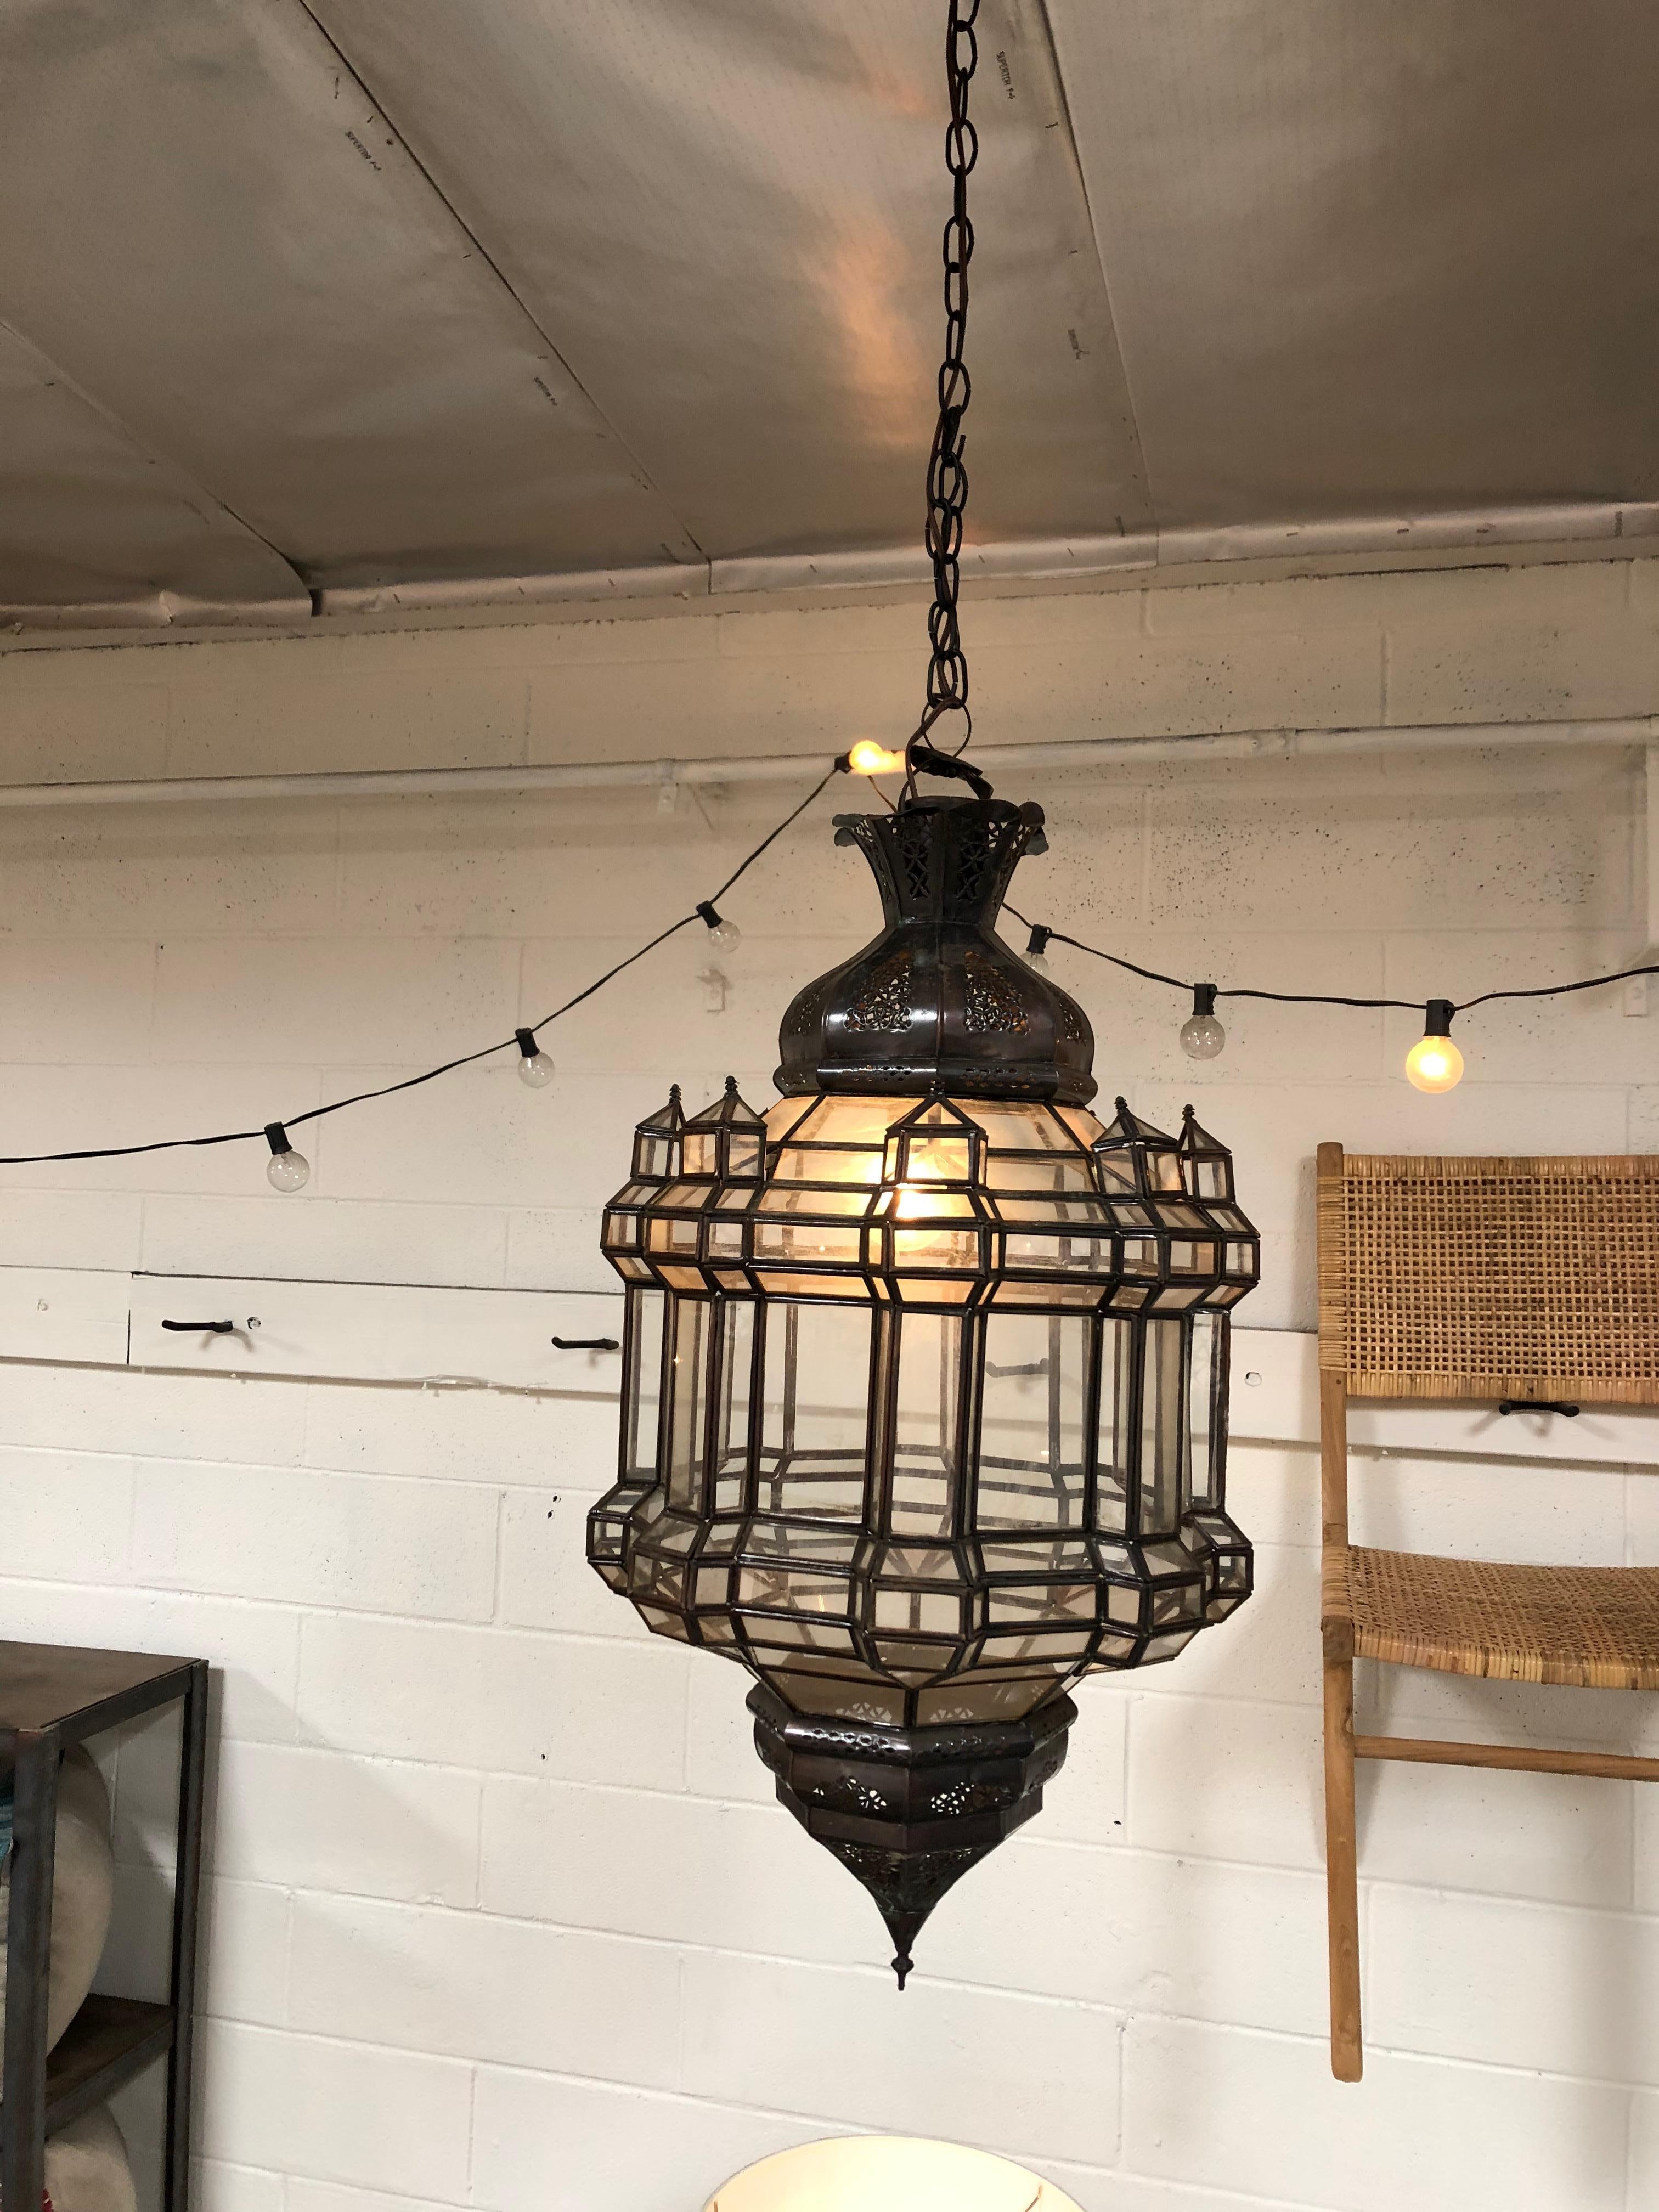 Mid-century vintage pendant light featuring a geometric frame design and perforated detailing.